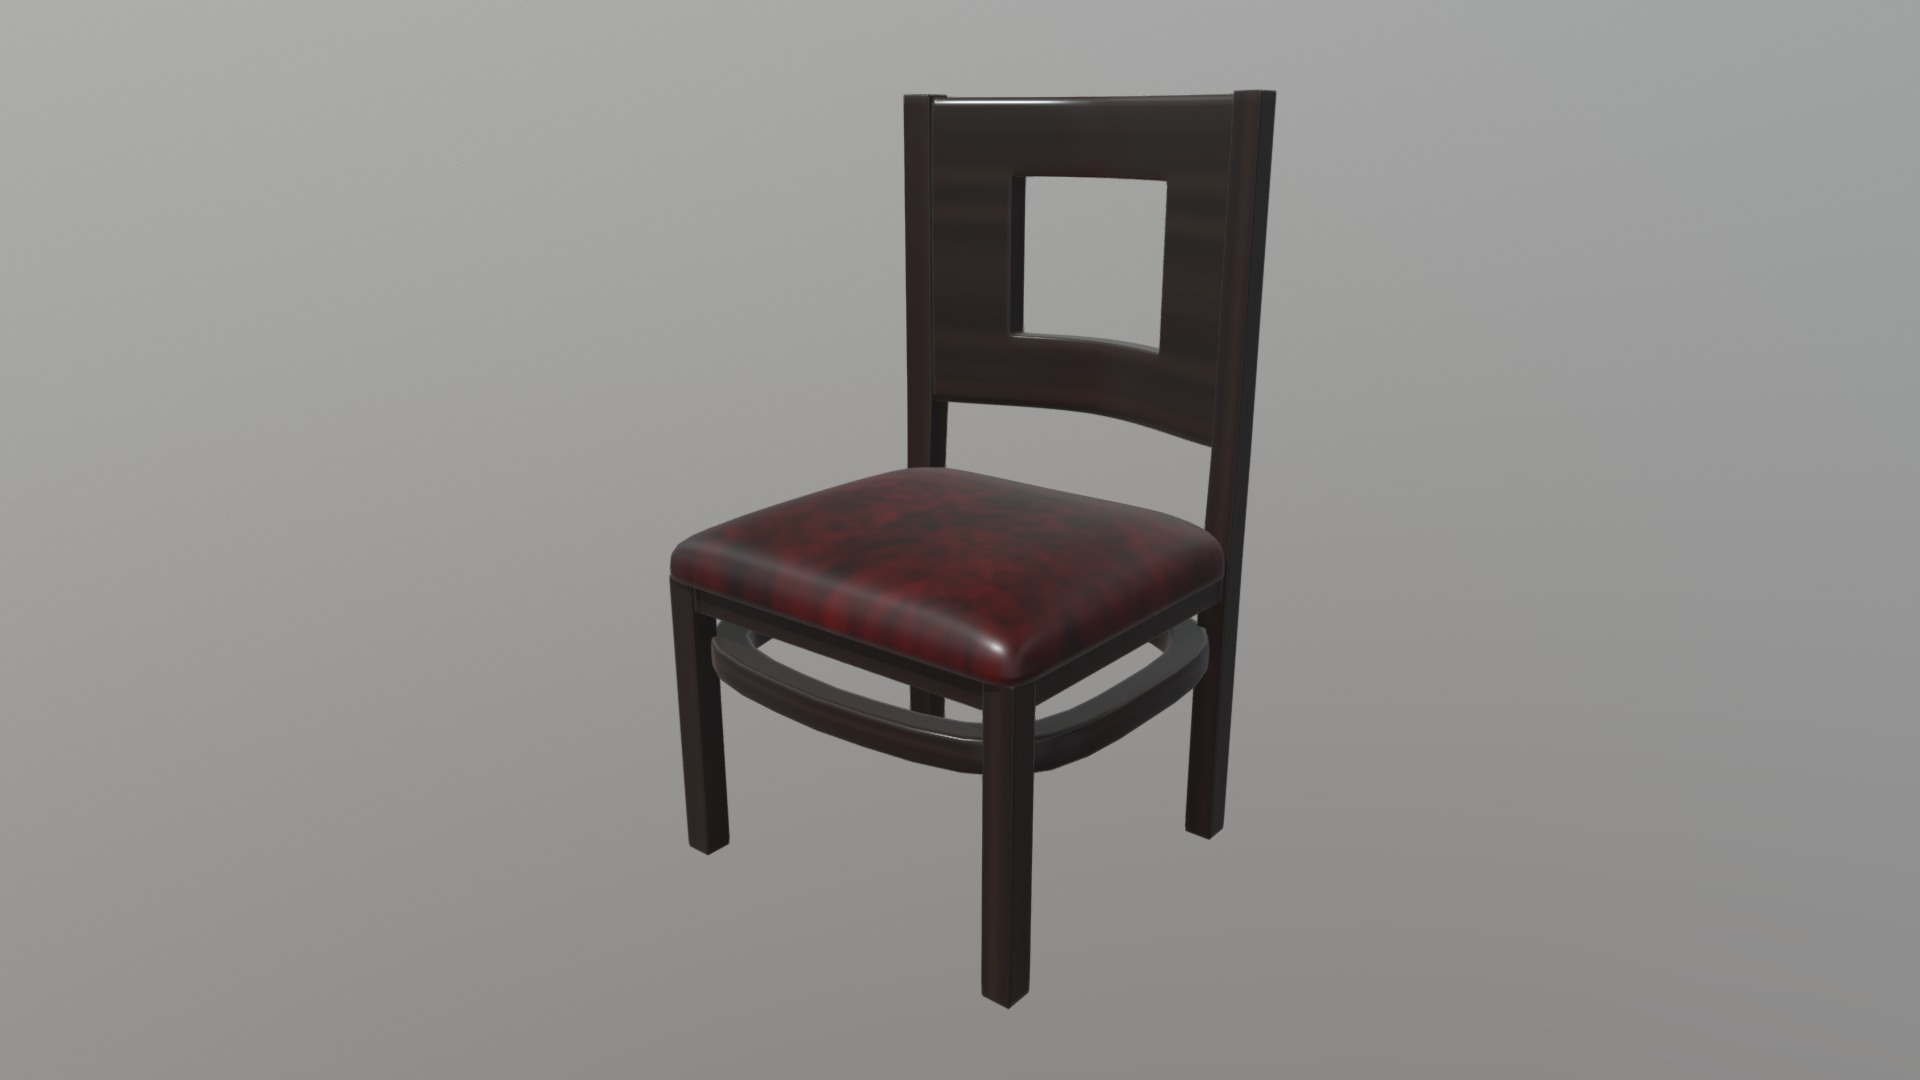 3D model Restaurant Dining Chair #2 - This is a 3D model of the Restaurant Dining Chair #2. The 3D model is about a chair with a cushion.